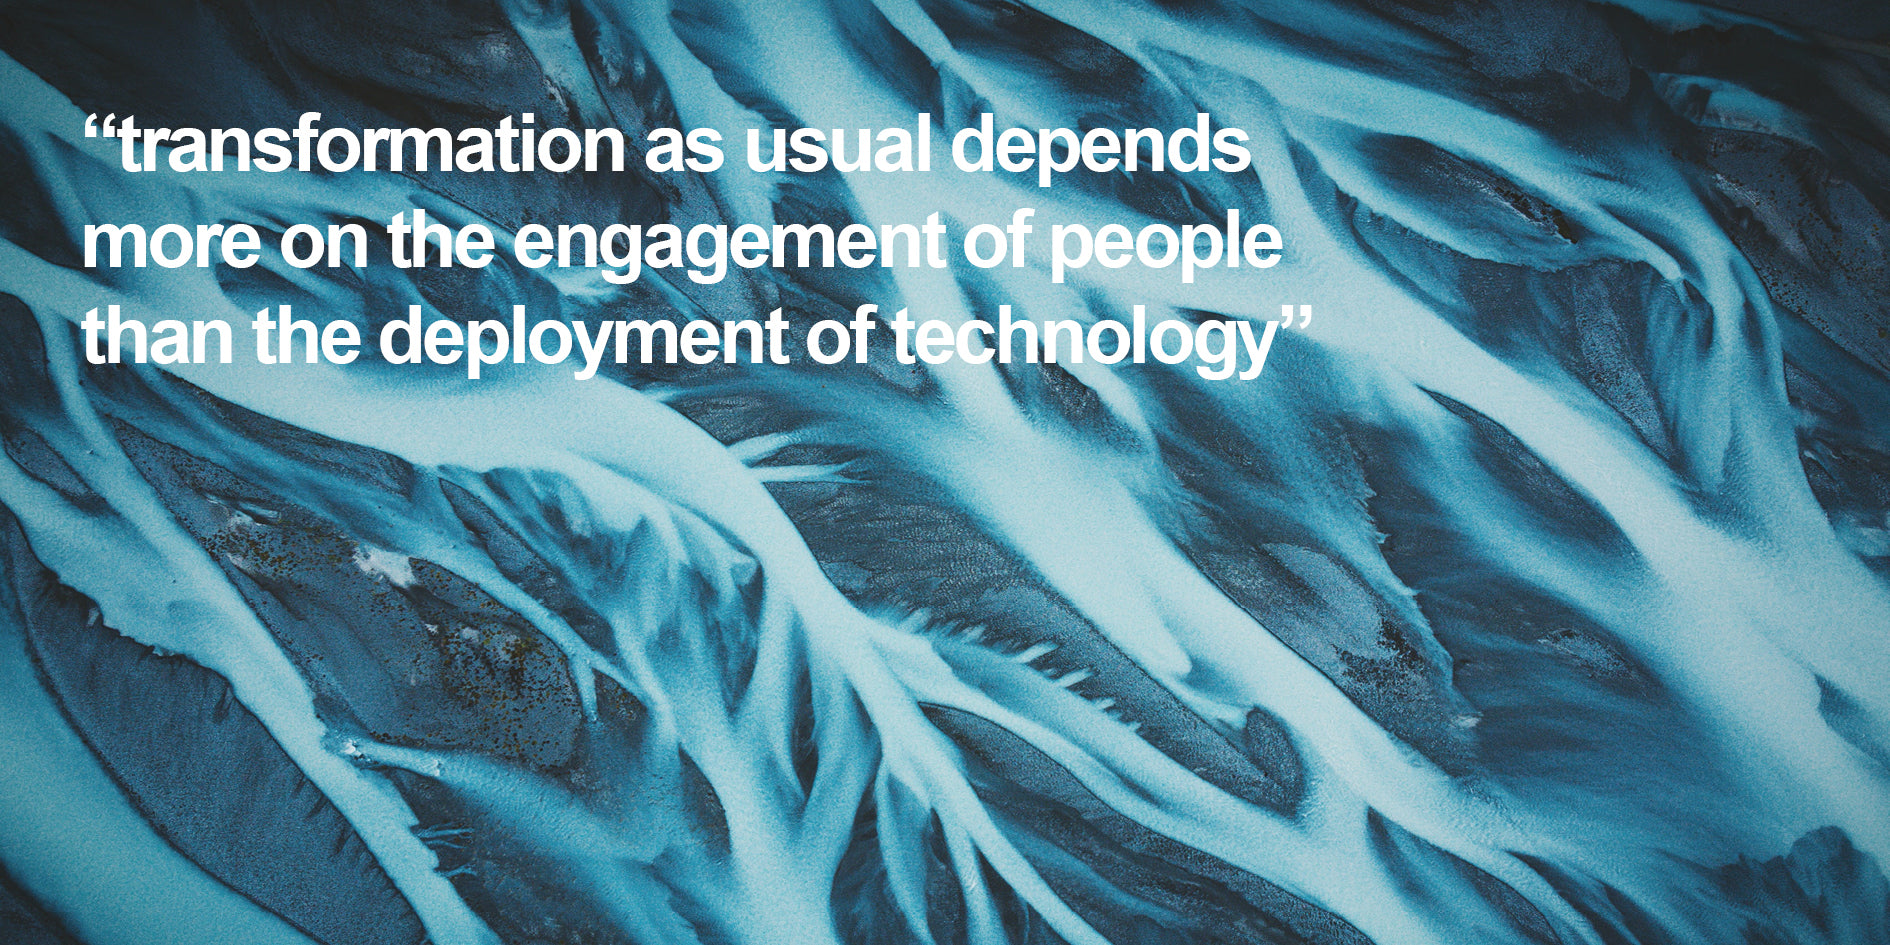 transformation as usual depends more on the engagement of people than the deployment of technology